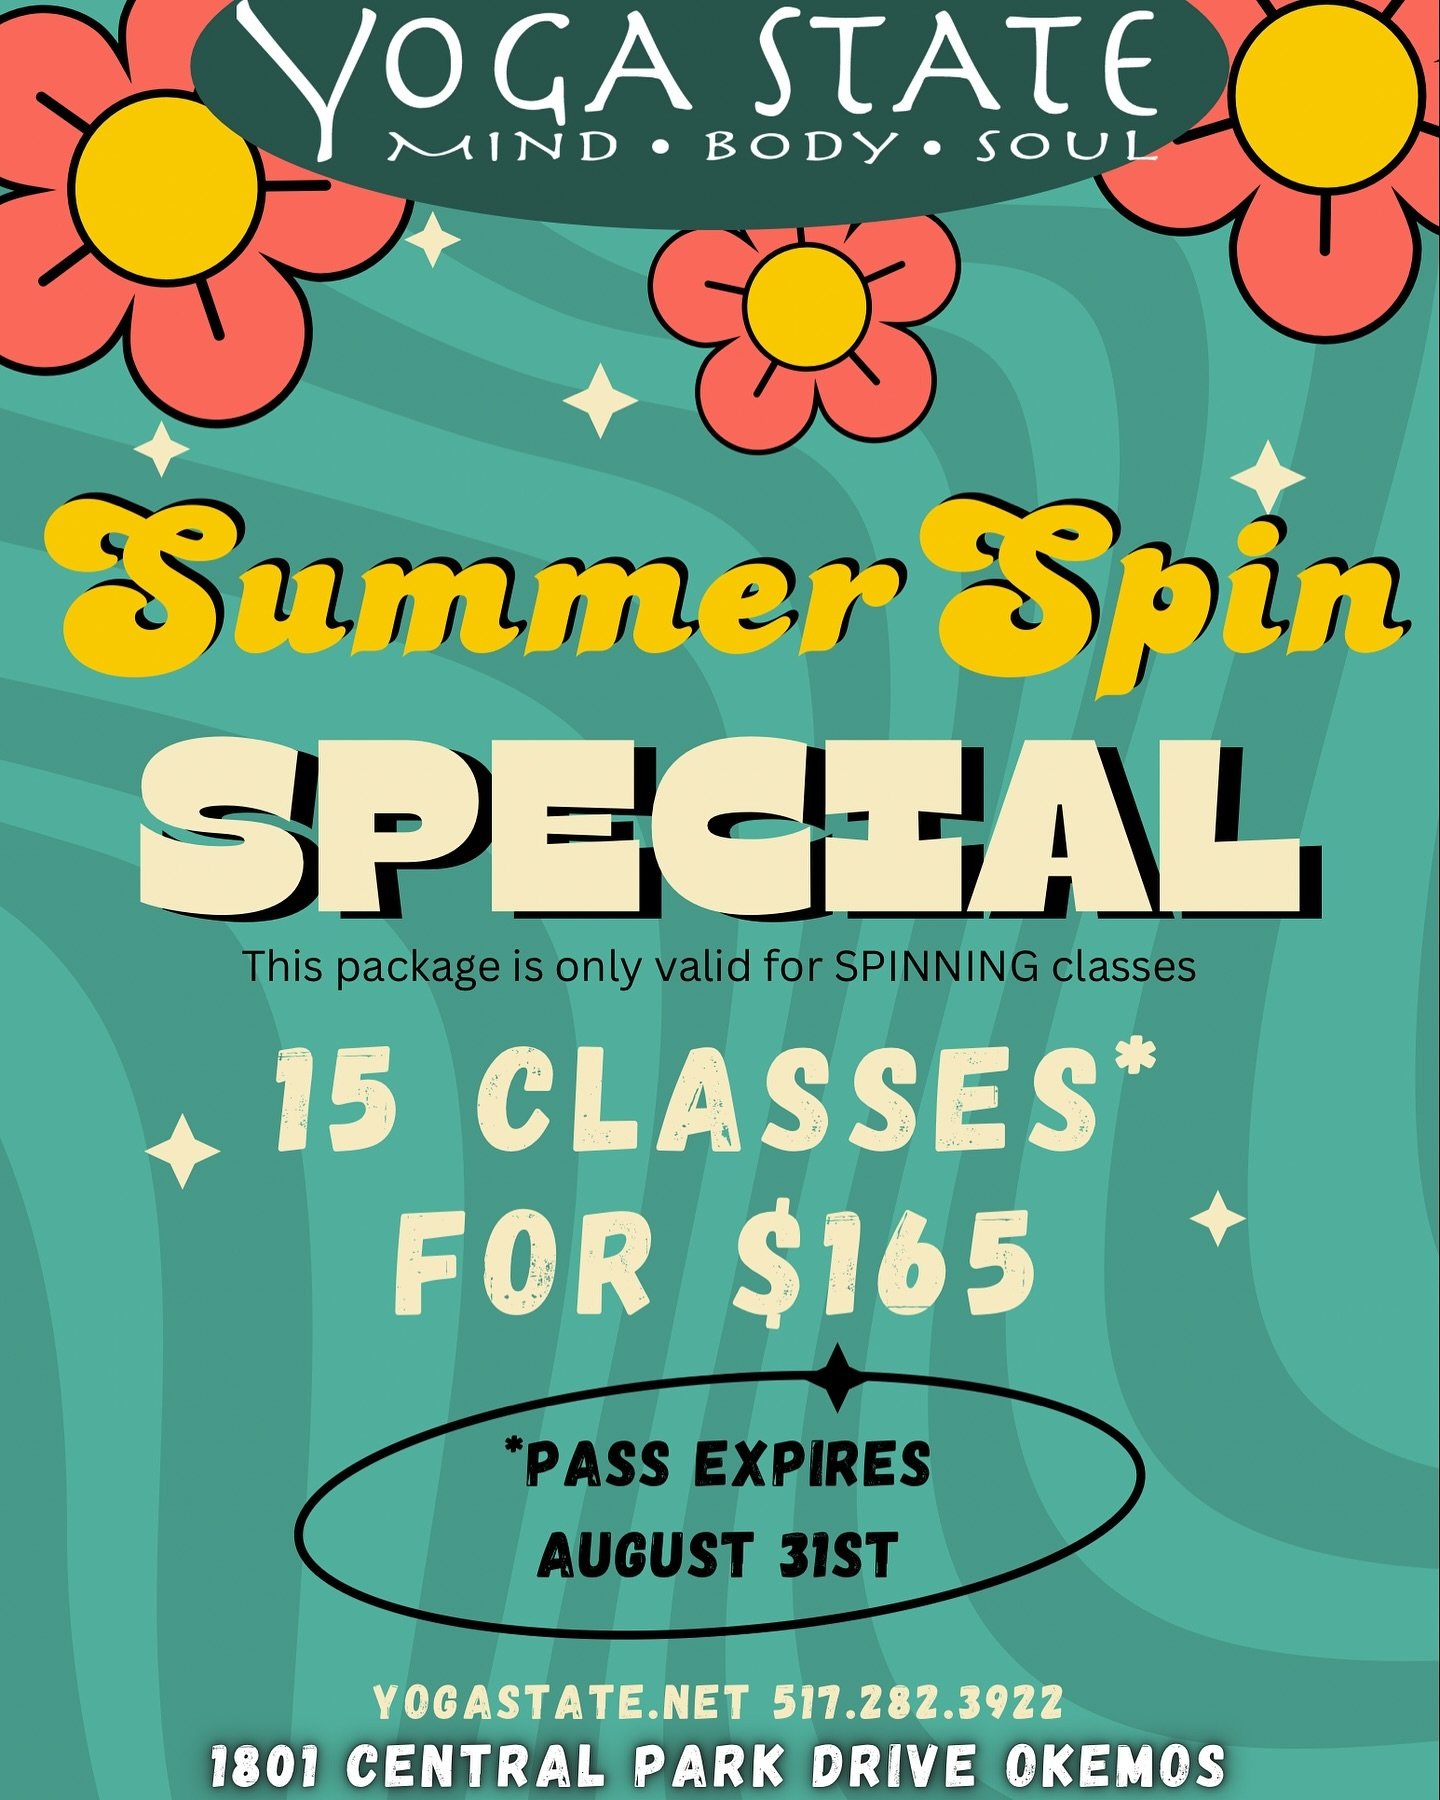 15 class pass Summer Spin Special is now available online and in the studio! This is a great deal to help you stay consistent!! Tell all of your favorite Spin pals!

yogastate.net to purchase
You can also purchase by phone 517-282-3922